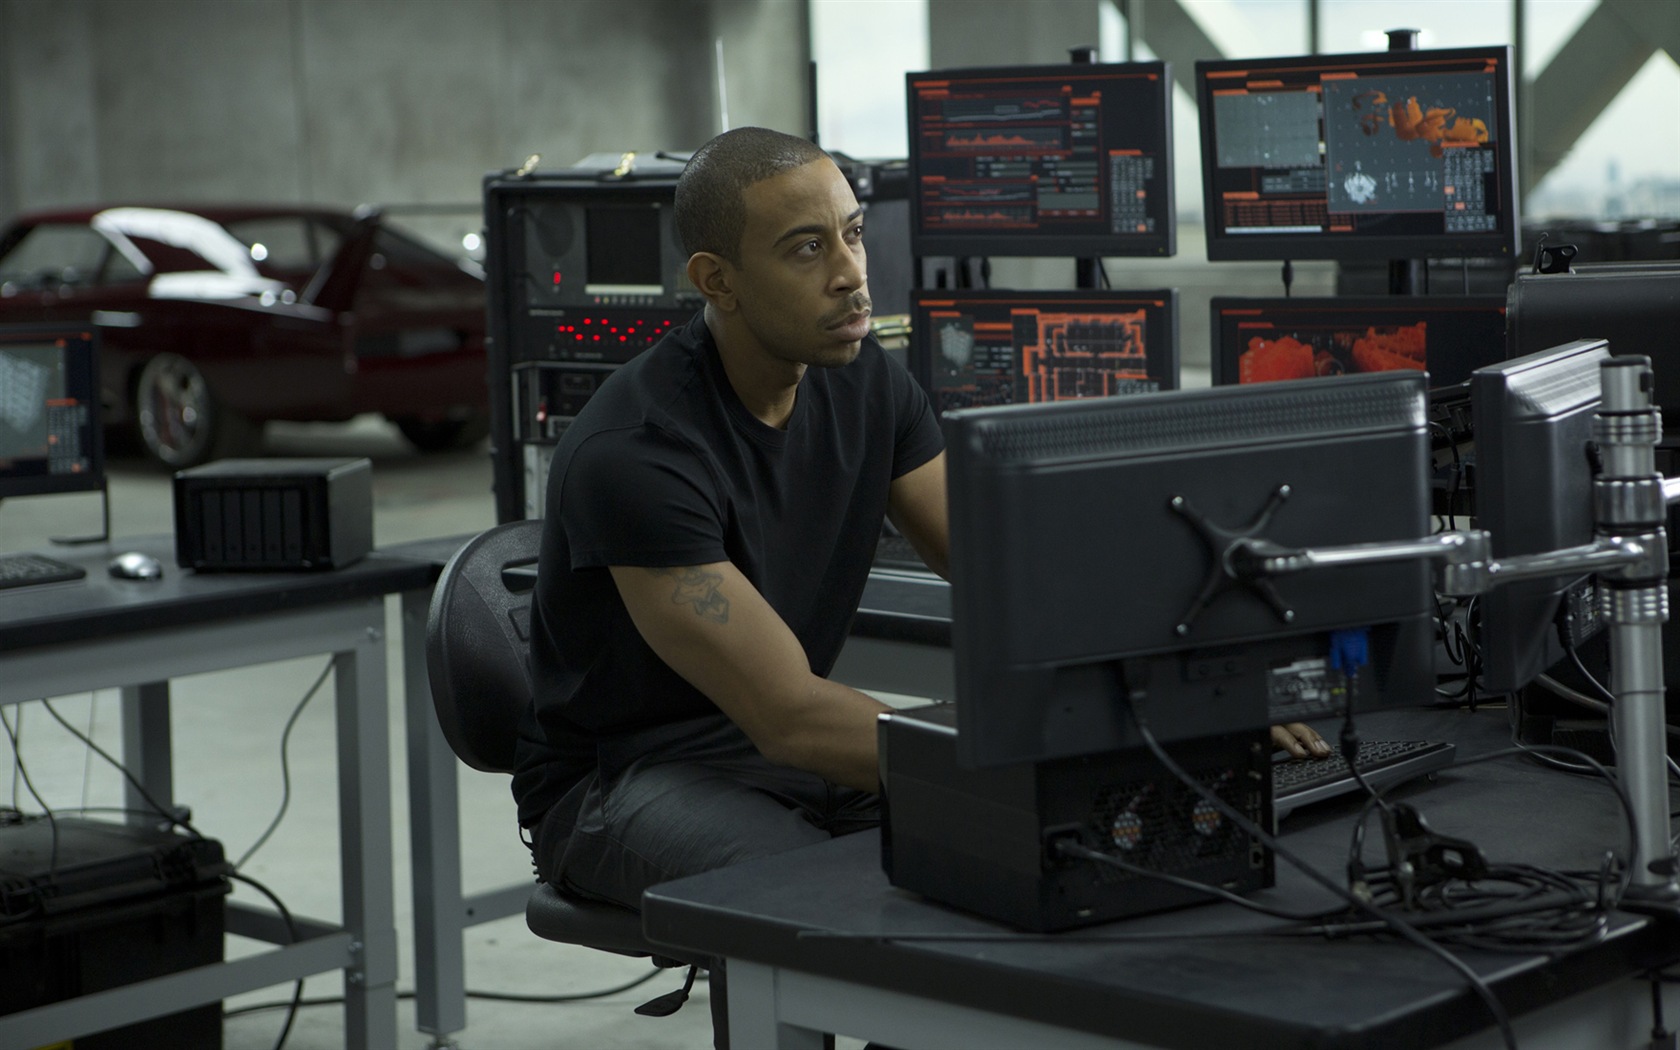 Fast And Furious 6 HD movie wallpapers #16 - 1680x1050